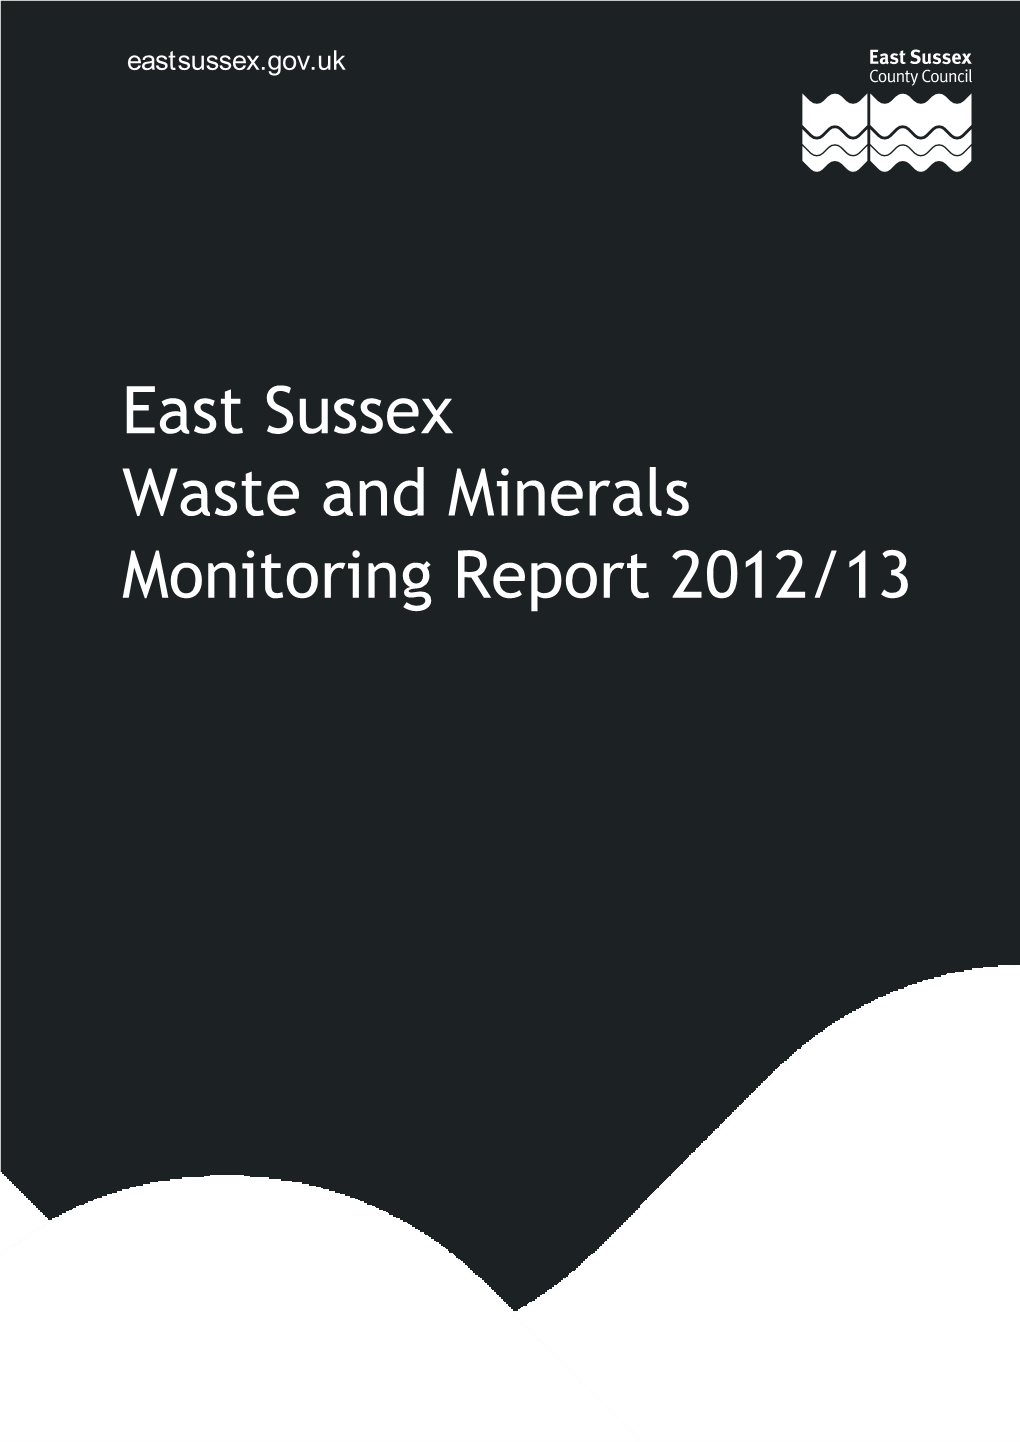 East Sussex Annual Monitoring Report 2012/13